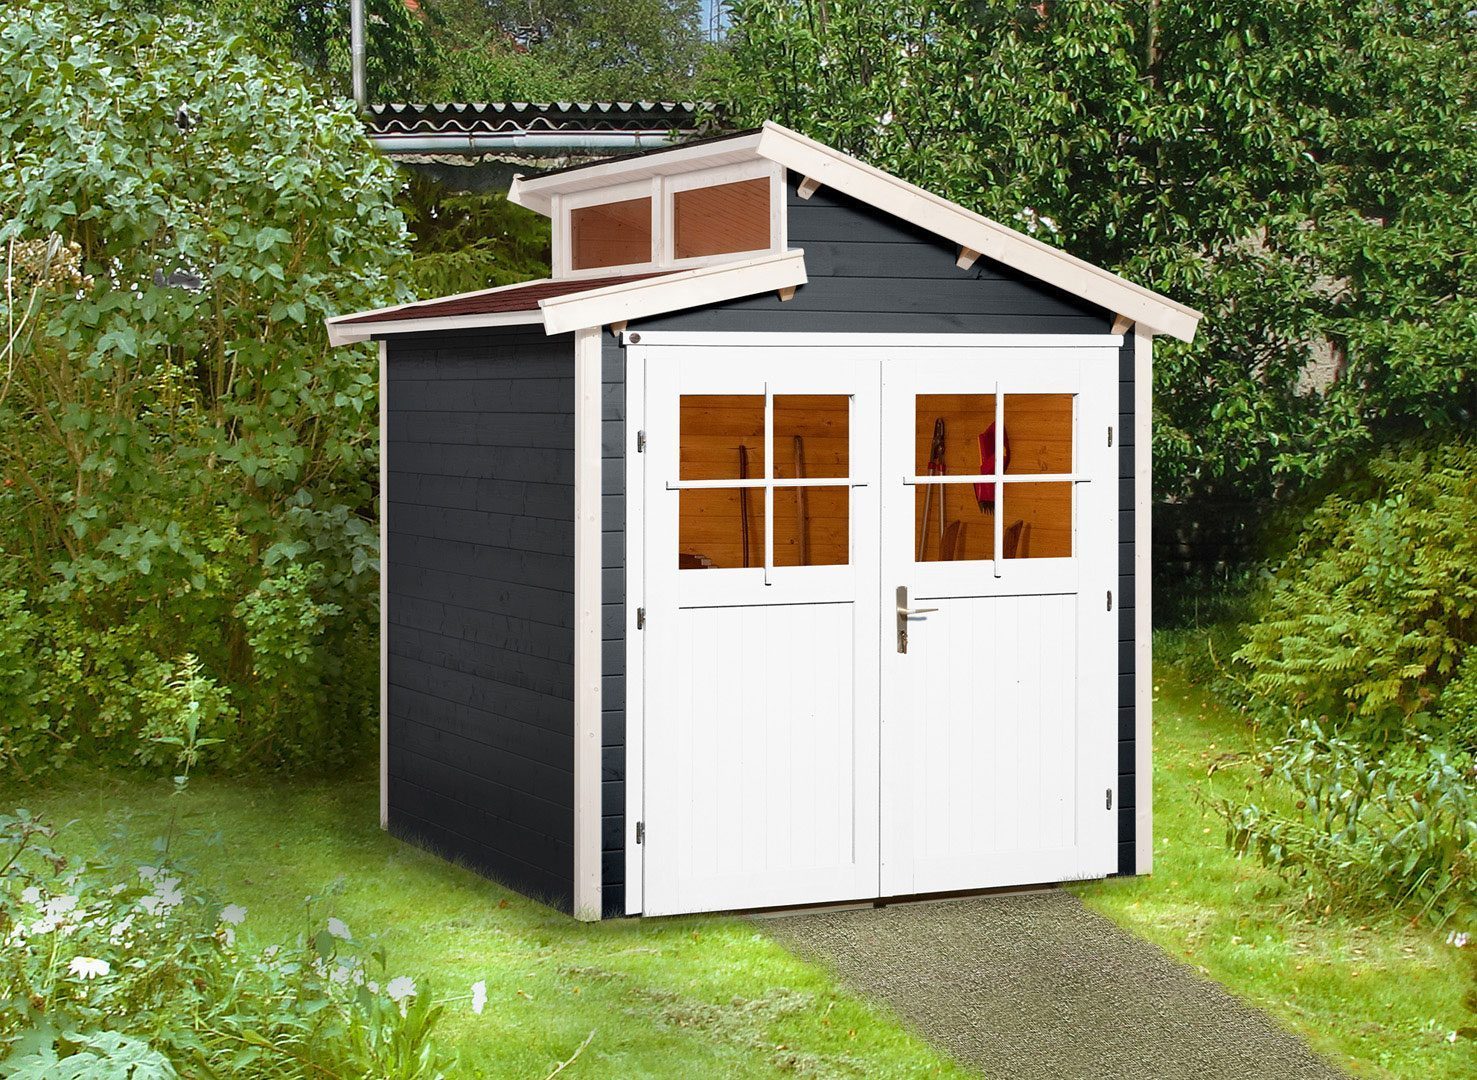 Heavenly Weka Garden Shed - model 226 with an offset roof shape